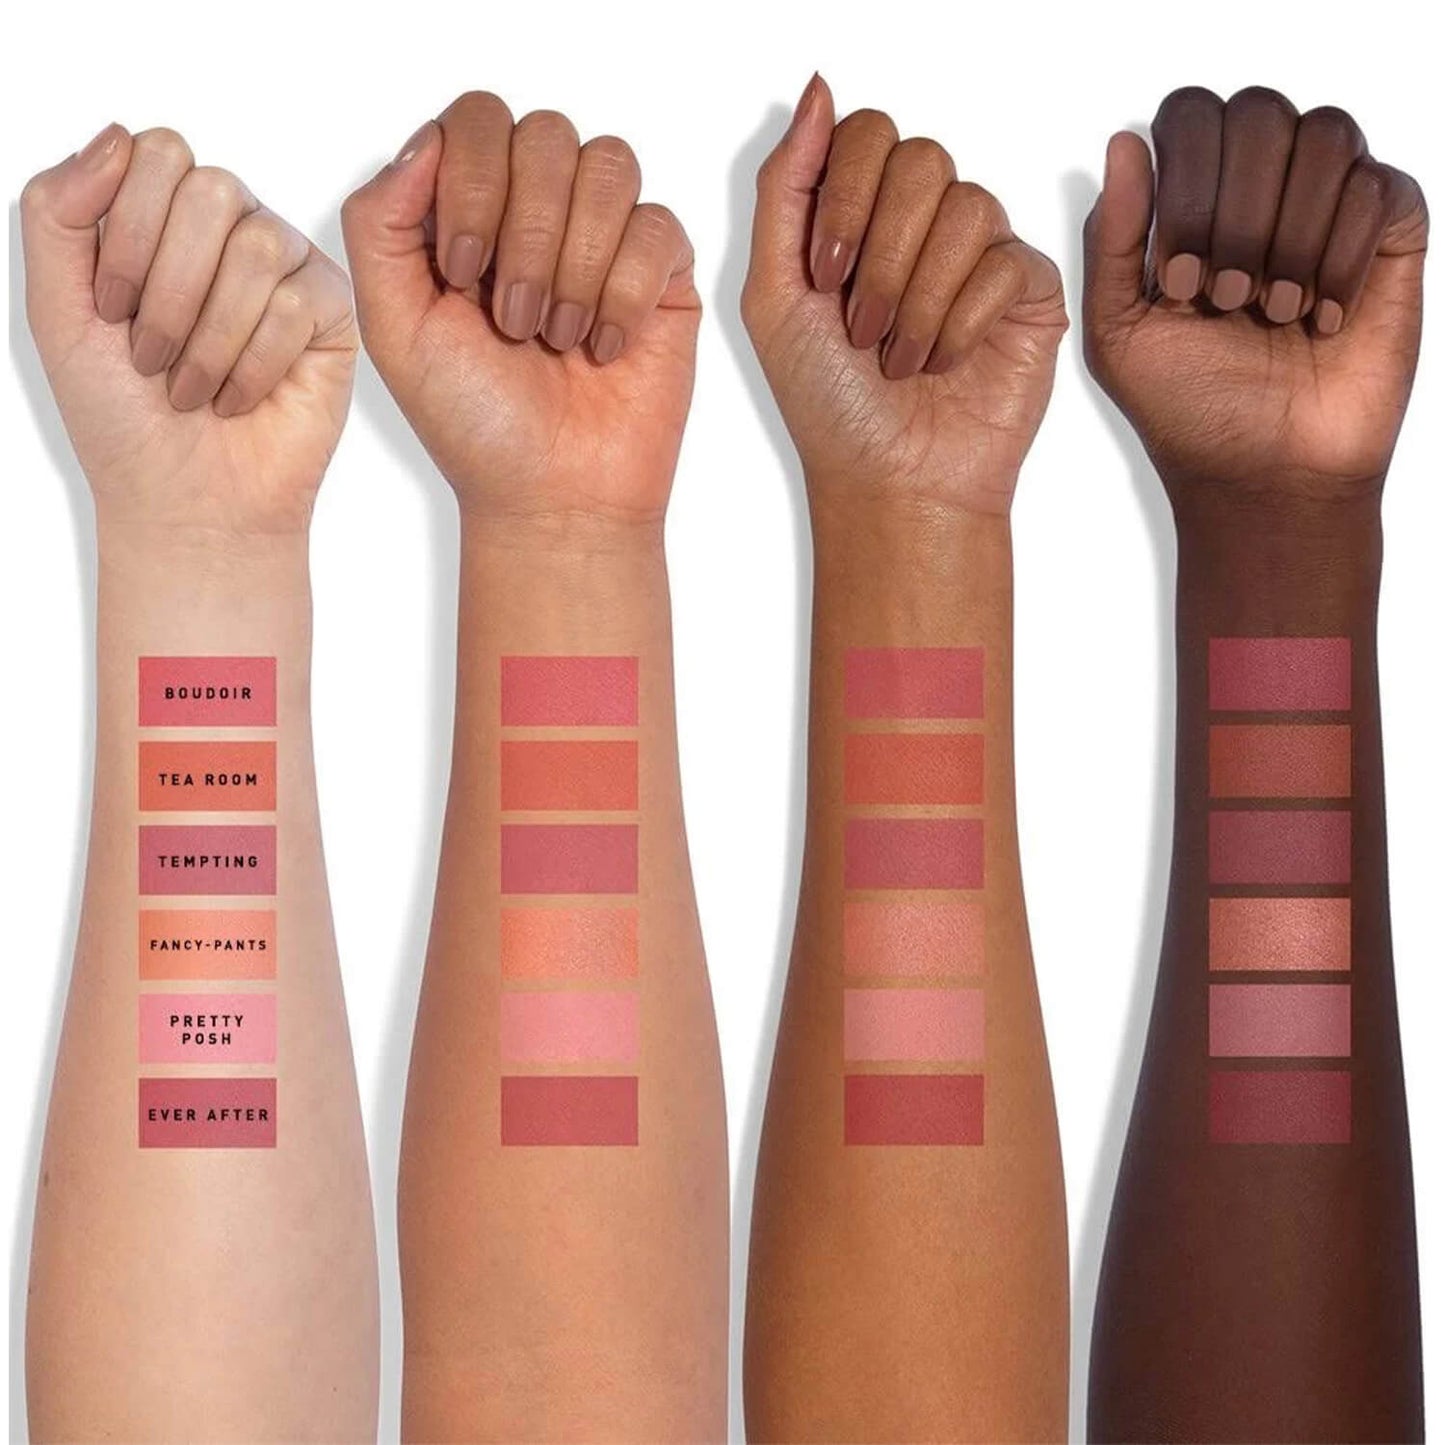 swatch of Morphe Jaclyn Cosmetics blush palette available at Heygirl.pk for delivery in Pakistan. 